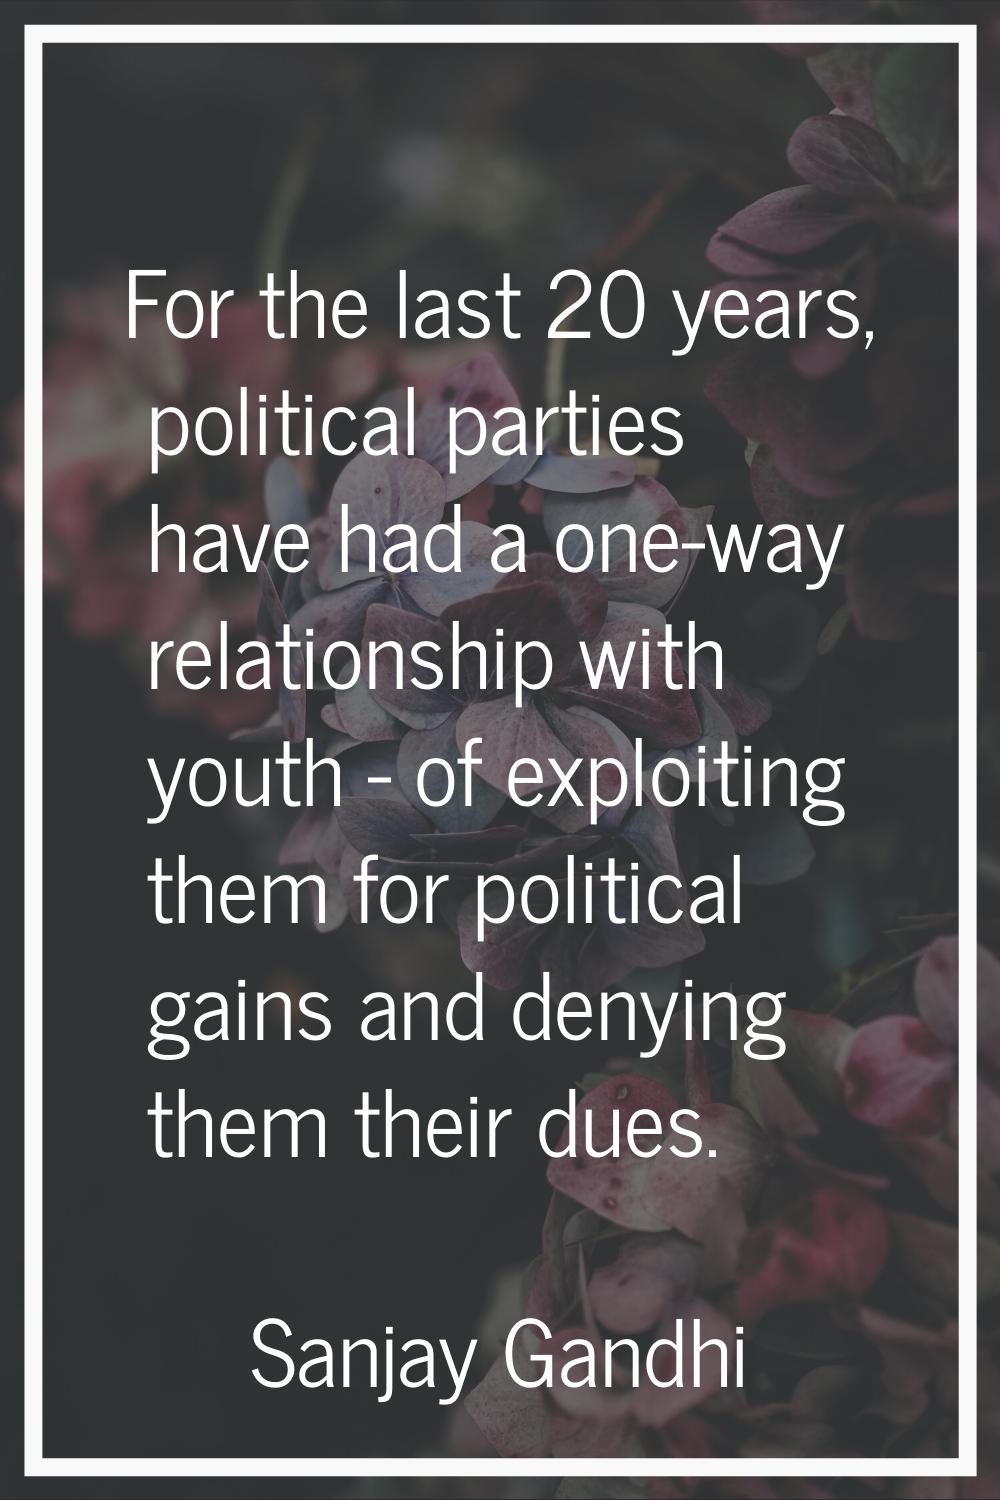 For the last 20 years, political parties have had a one-way relationship with youth - of exploiting